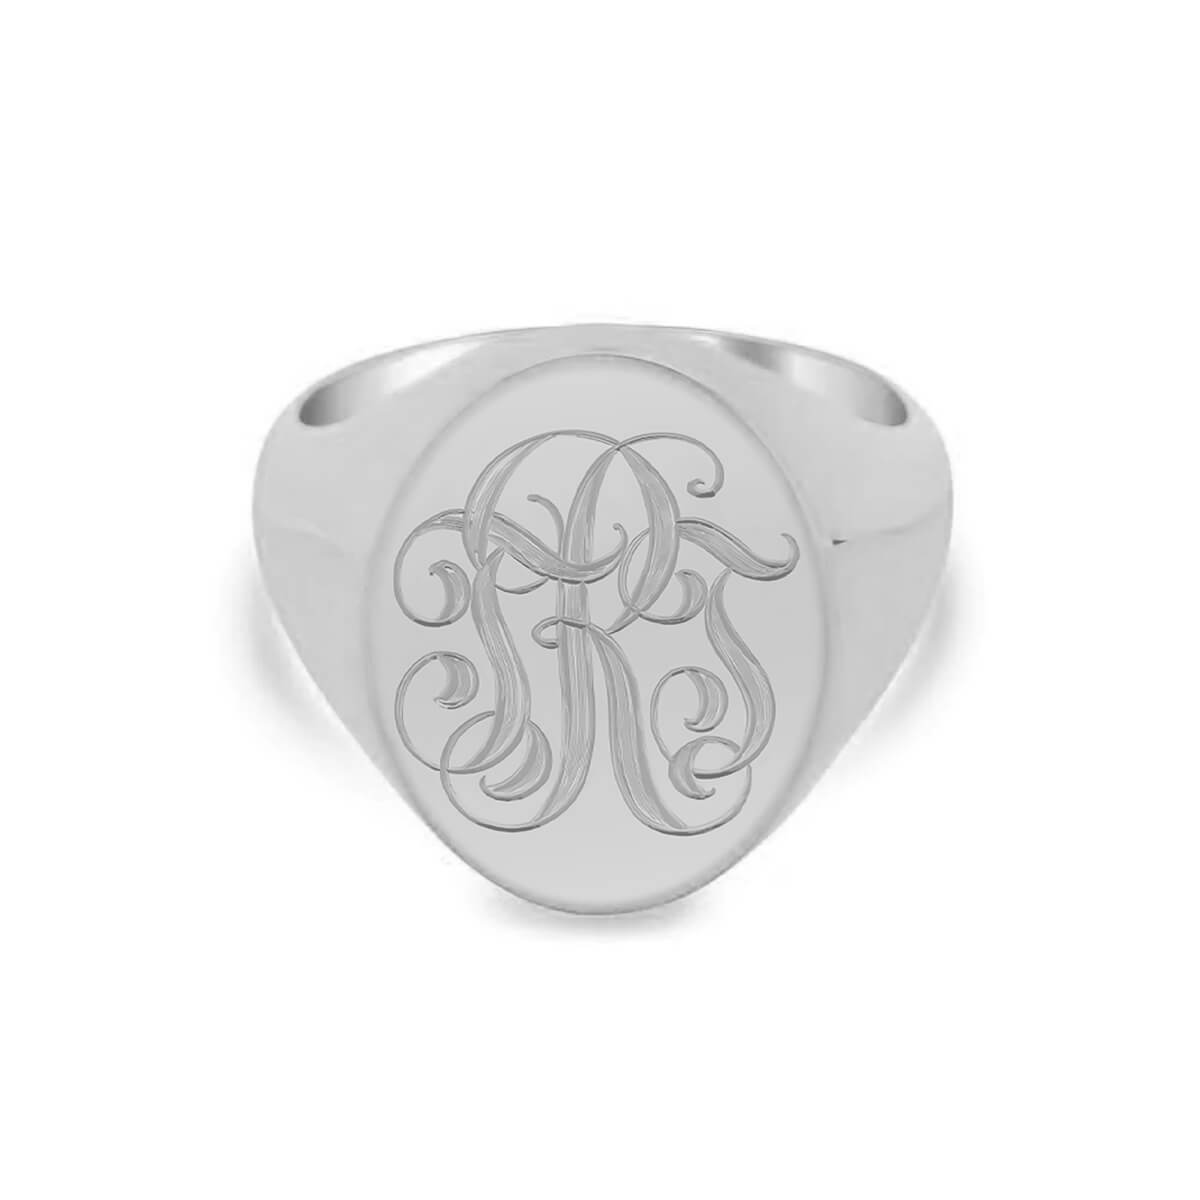 Women's Oval Signet Ring - Extra Large - Hand Engraved Script 